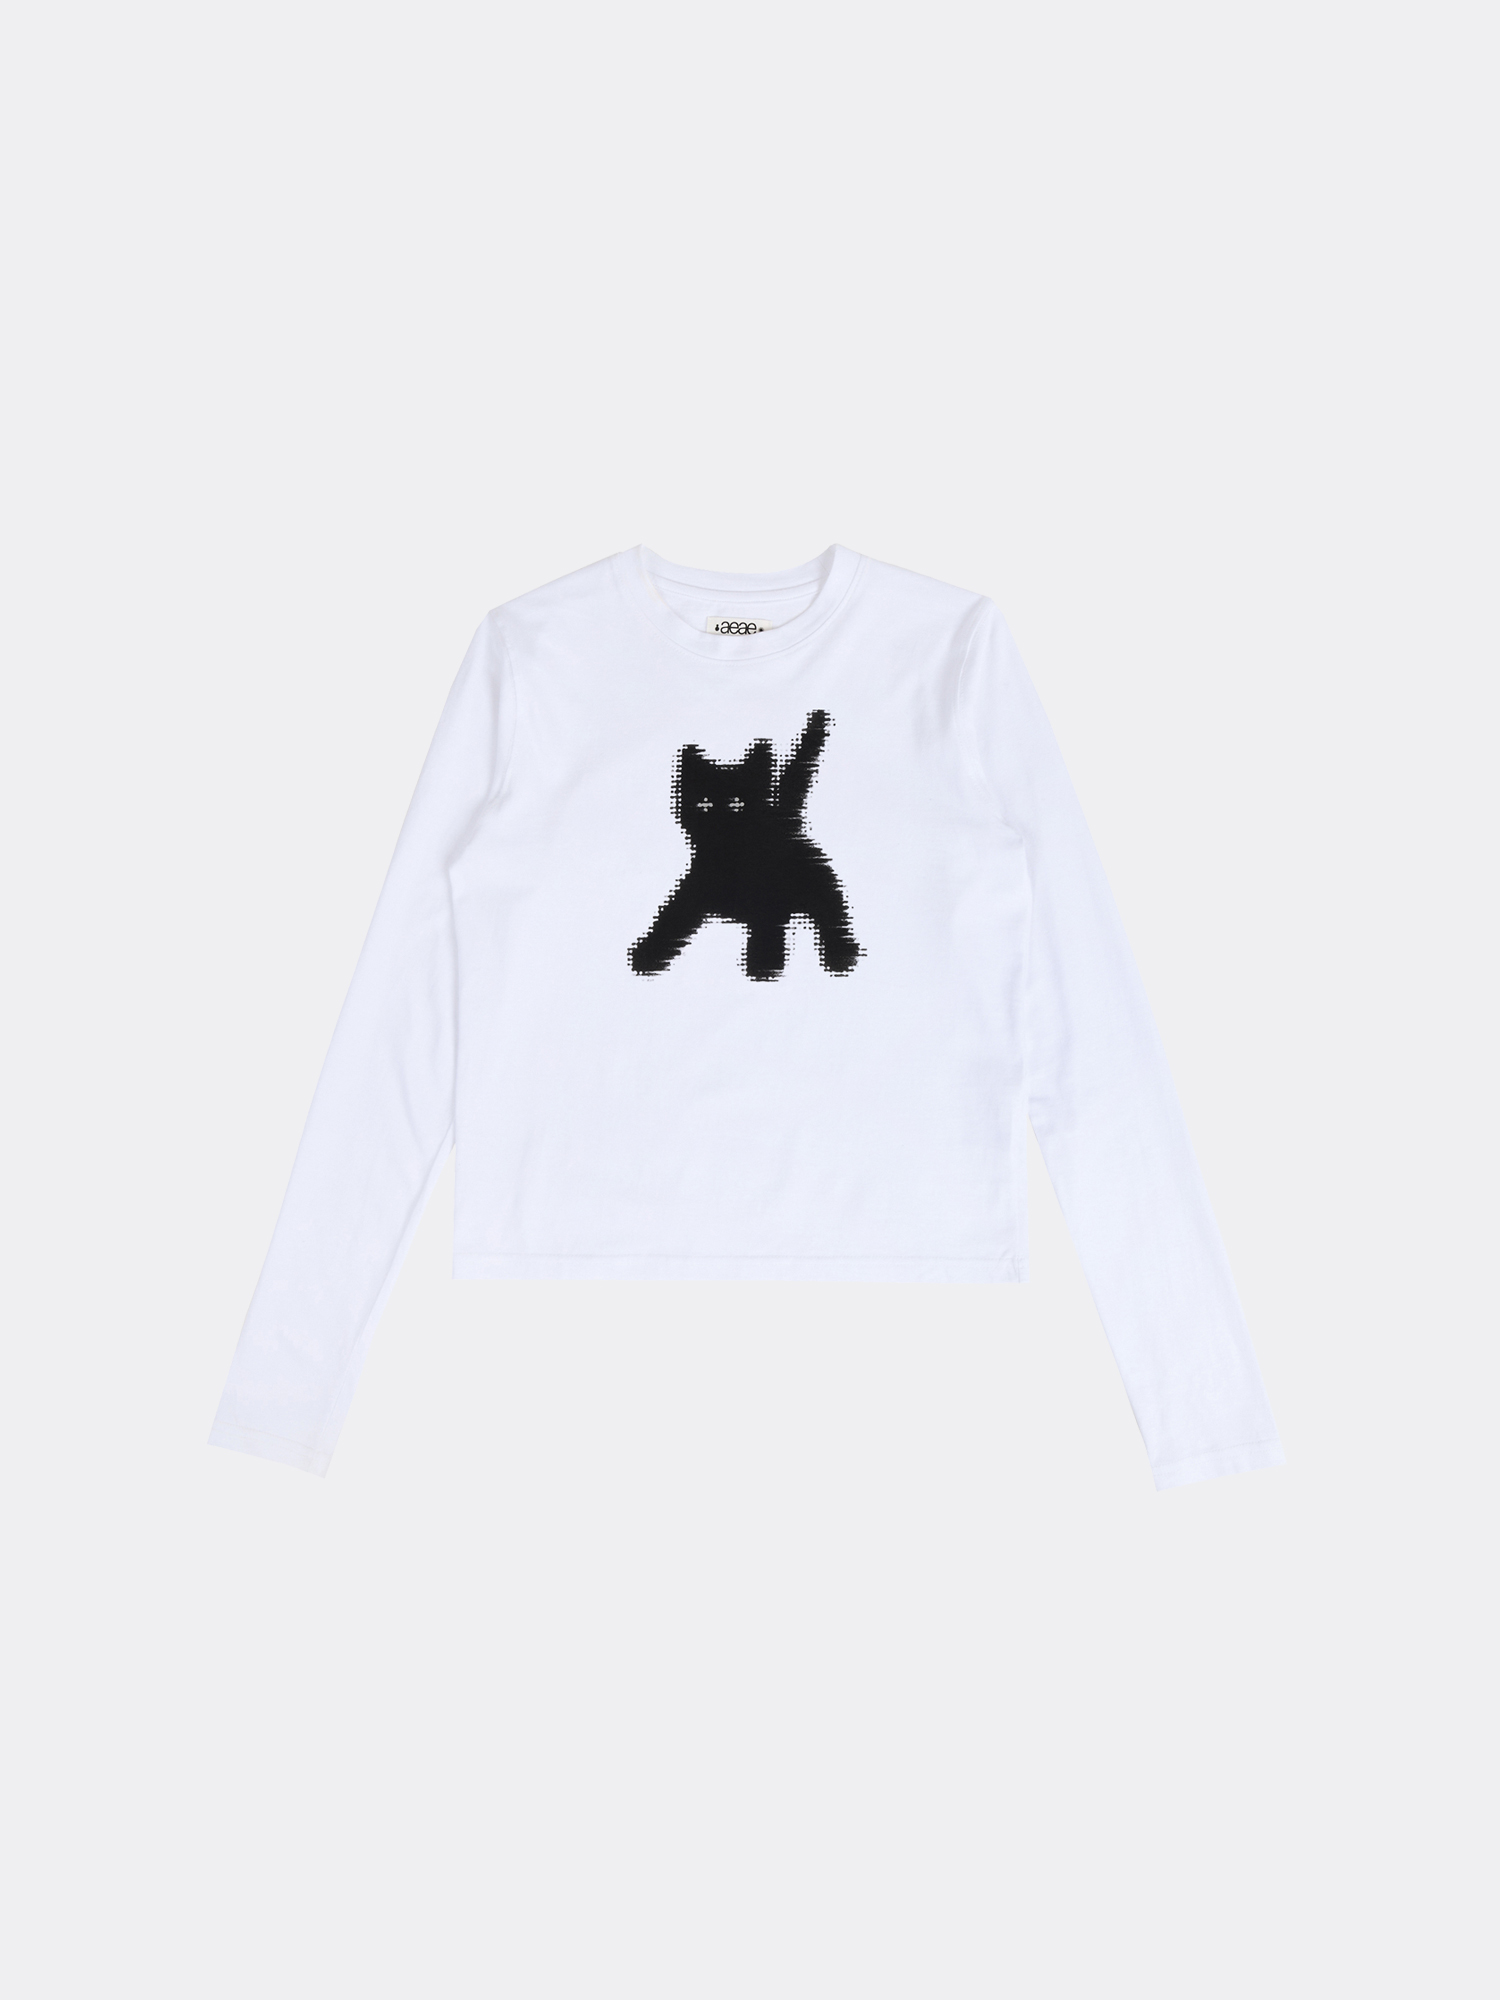 aeae FLASHED CATS EYE L/S-WHITE